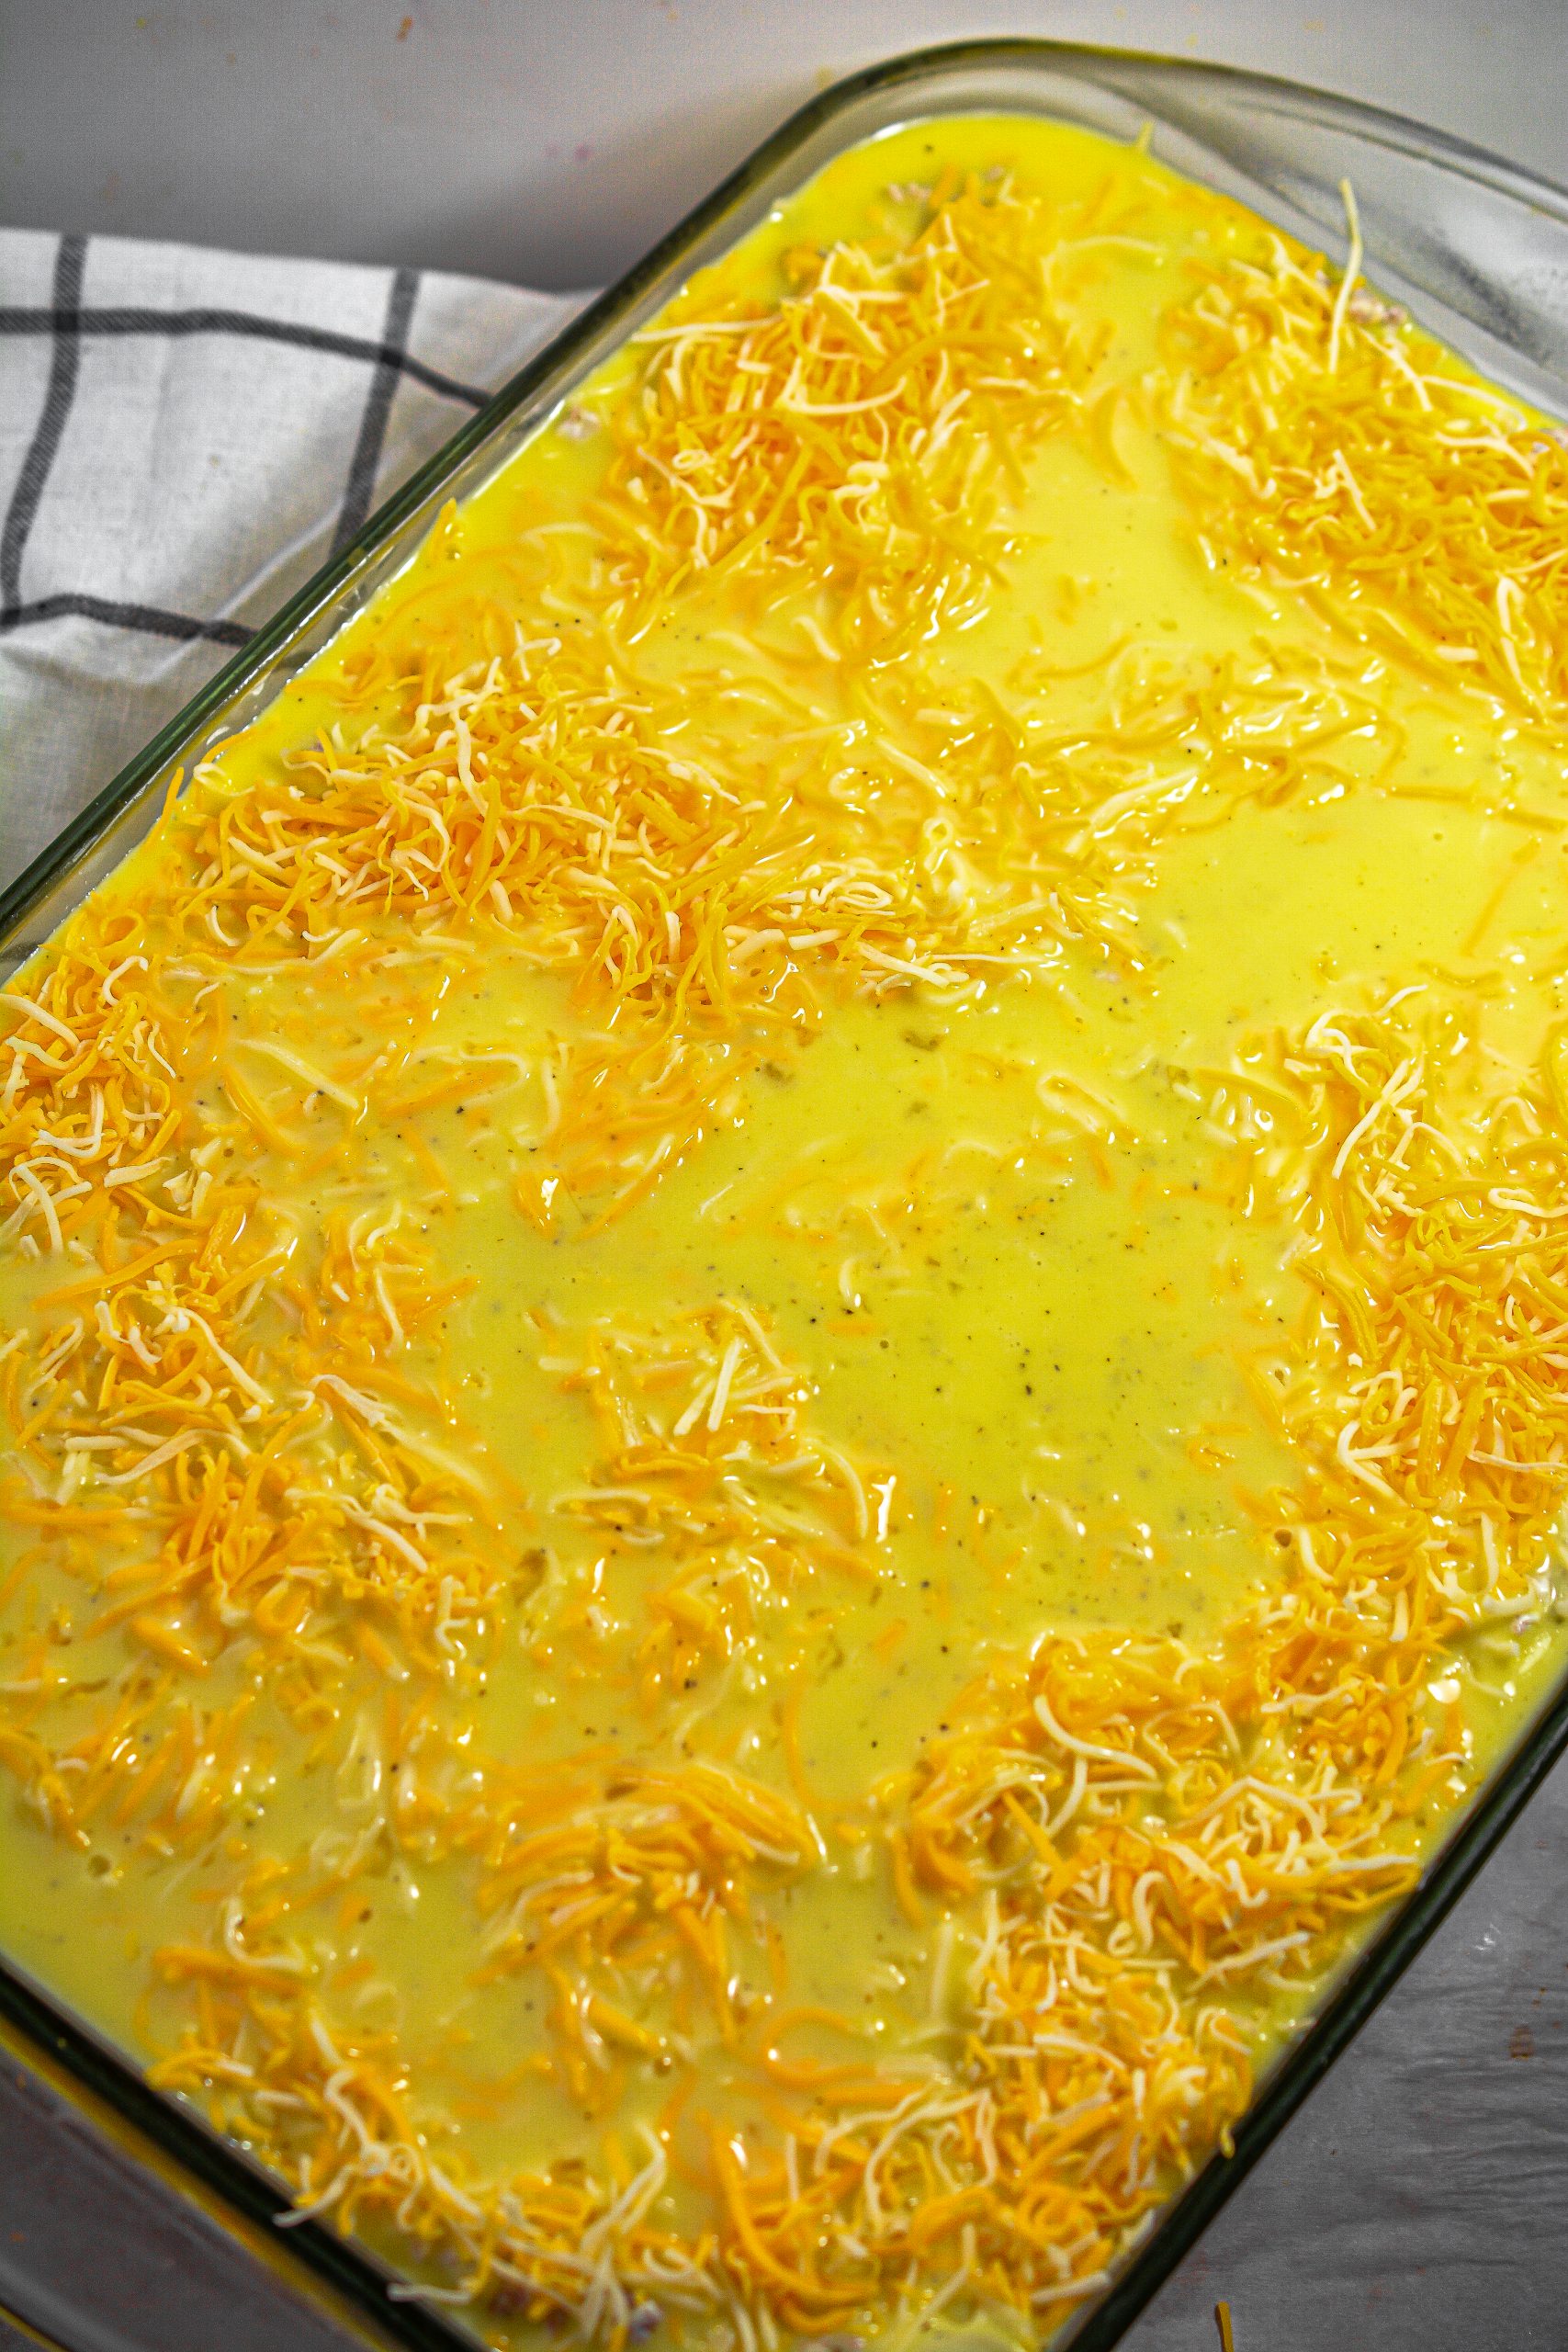 Pour the egg mixture over the cheese in the casserole dish.